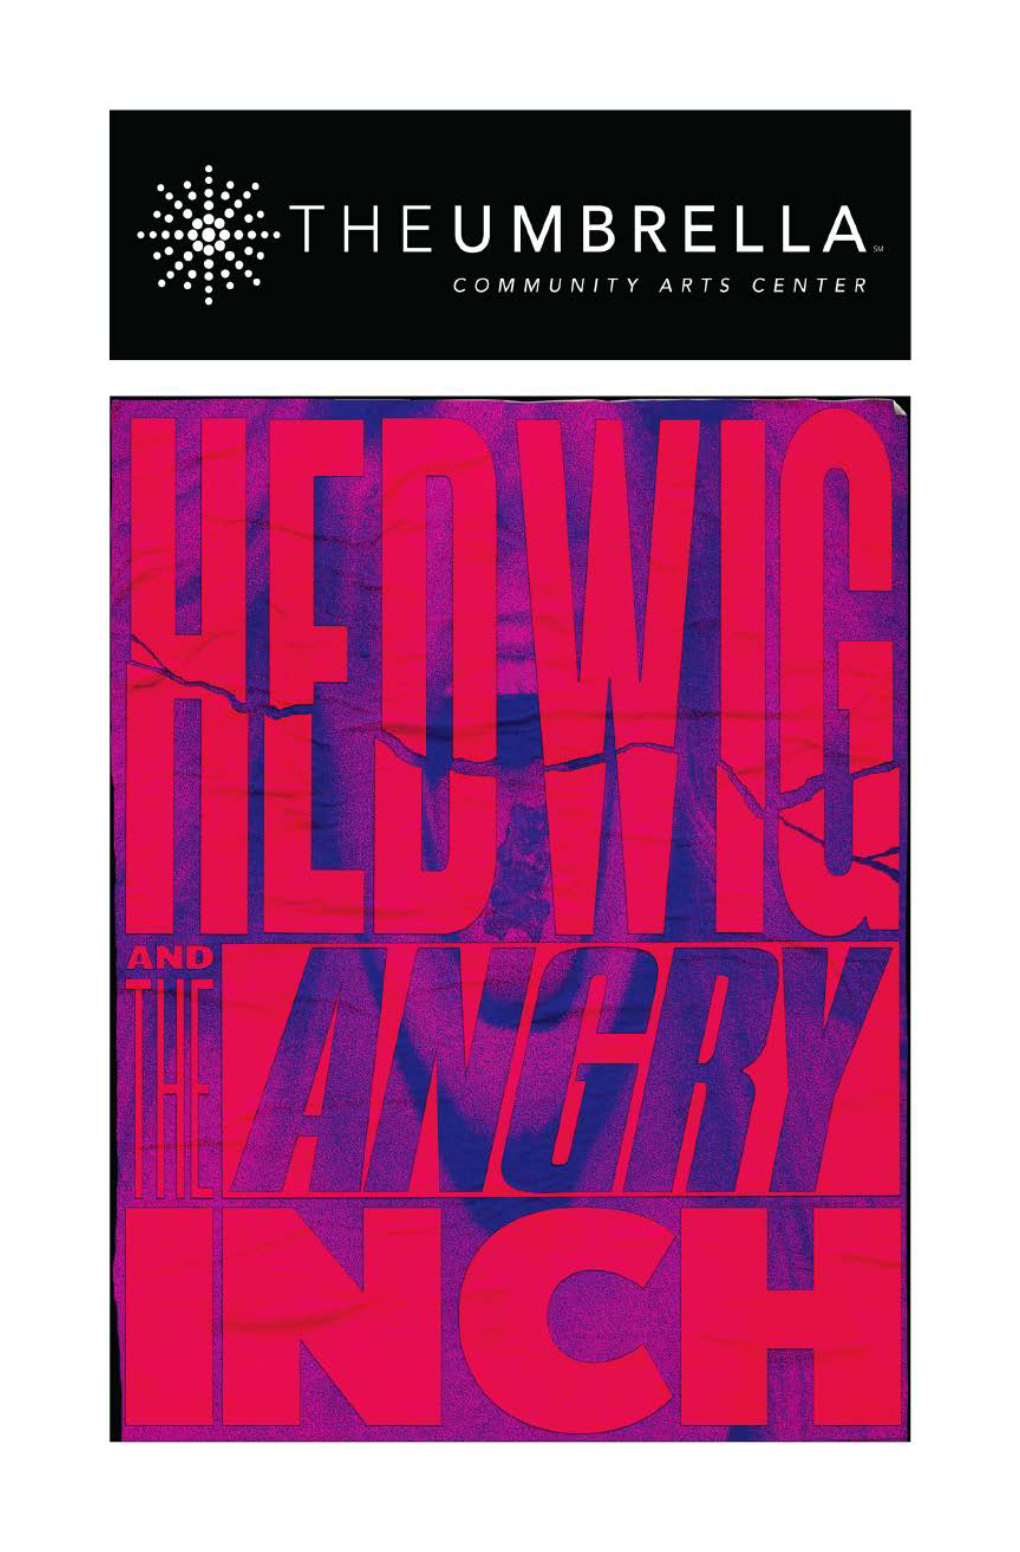 Playbill: Hedwig & the Angry Inch 2019